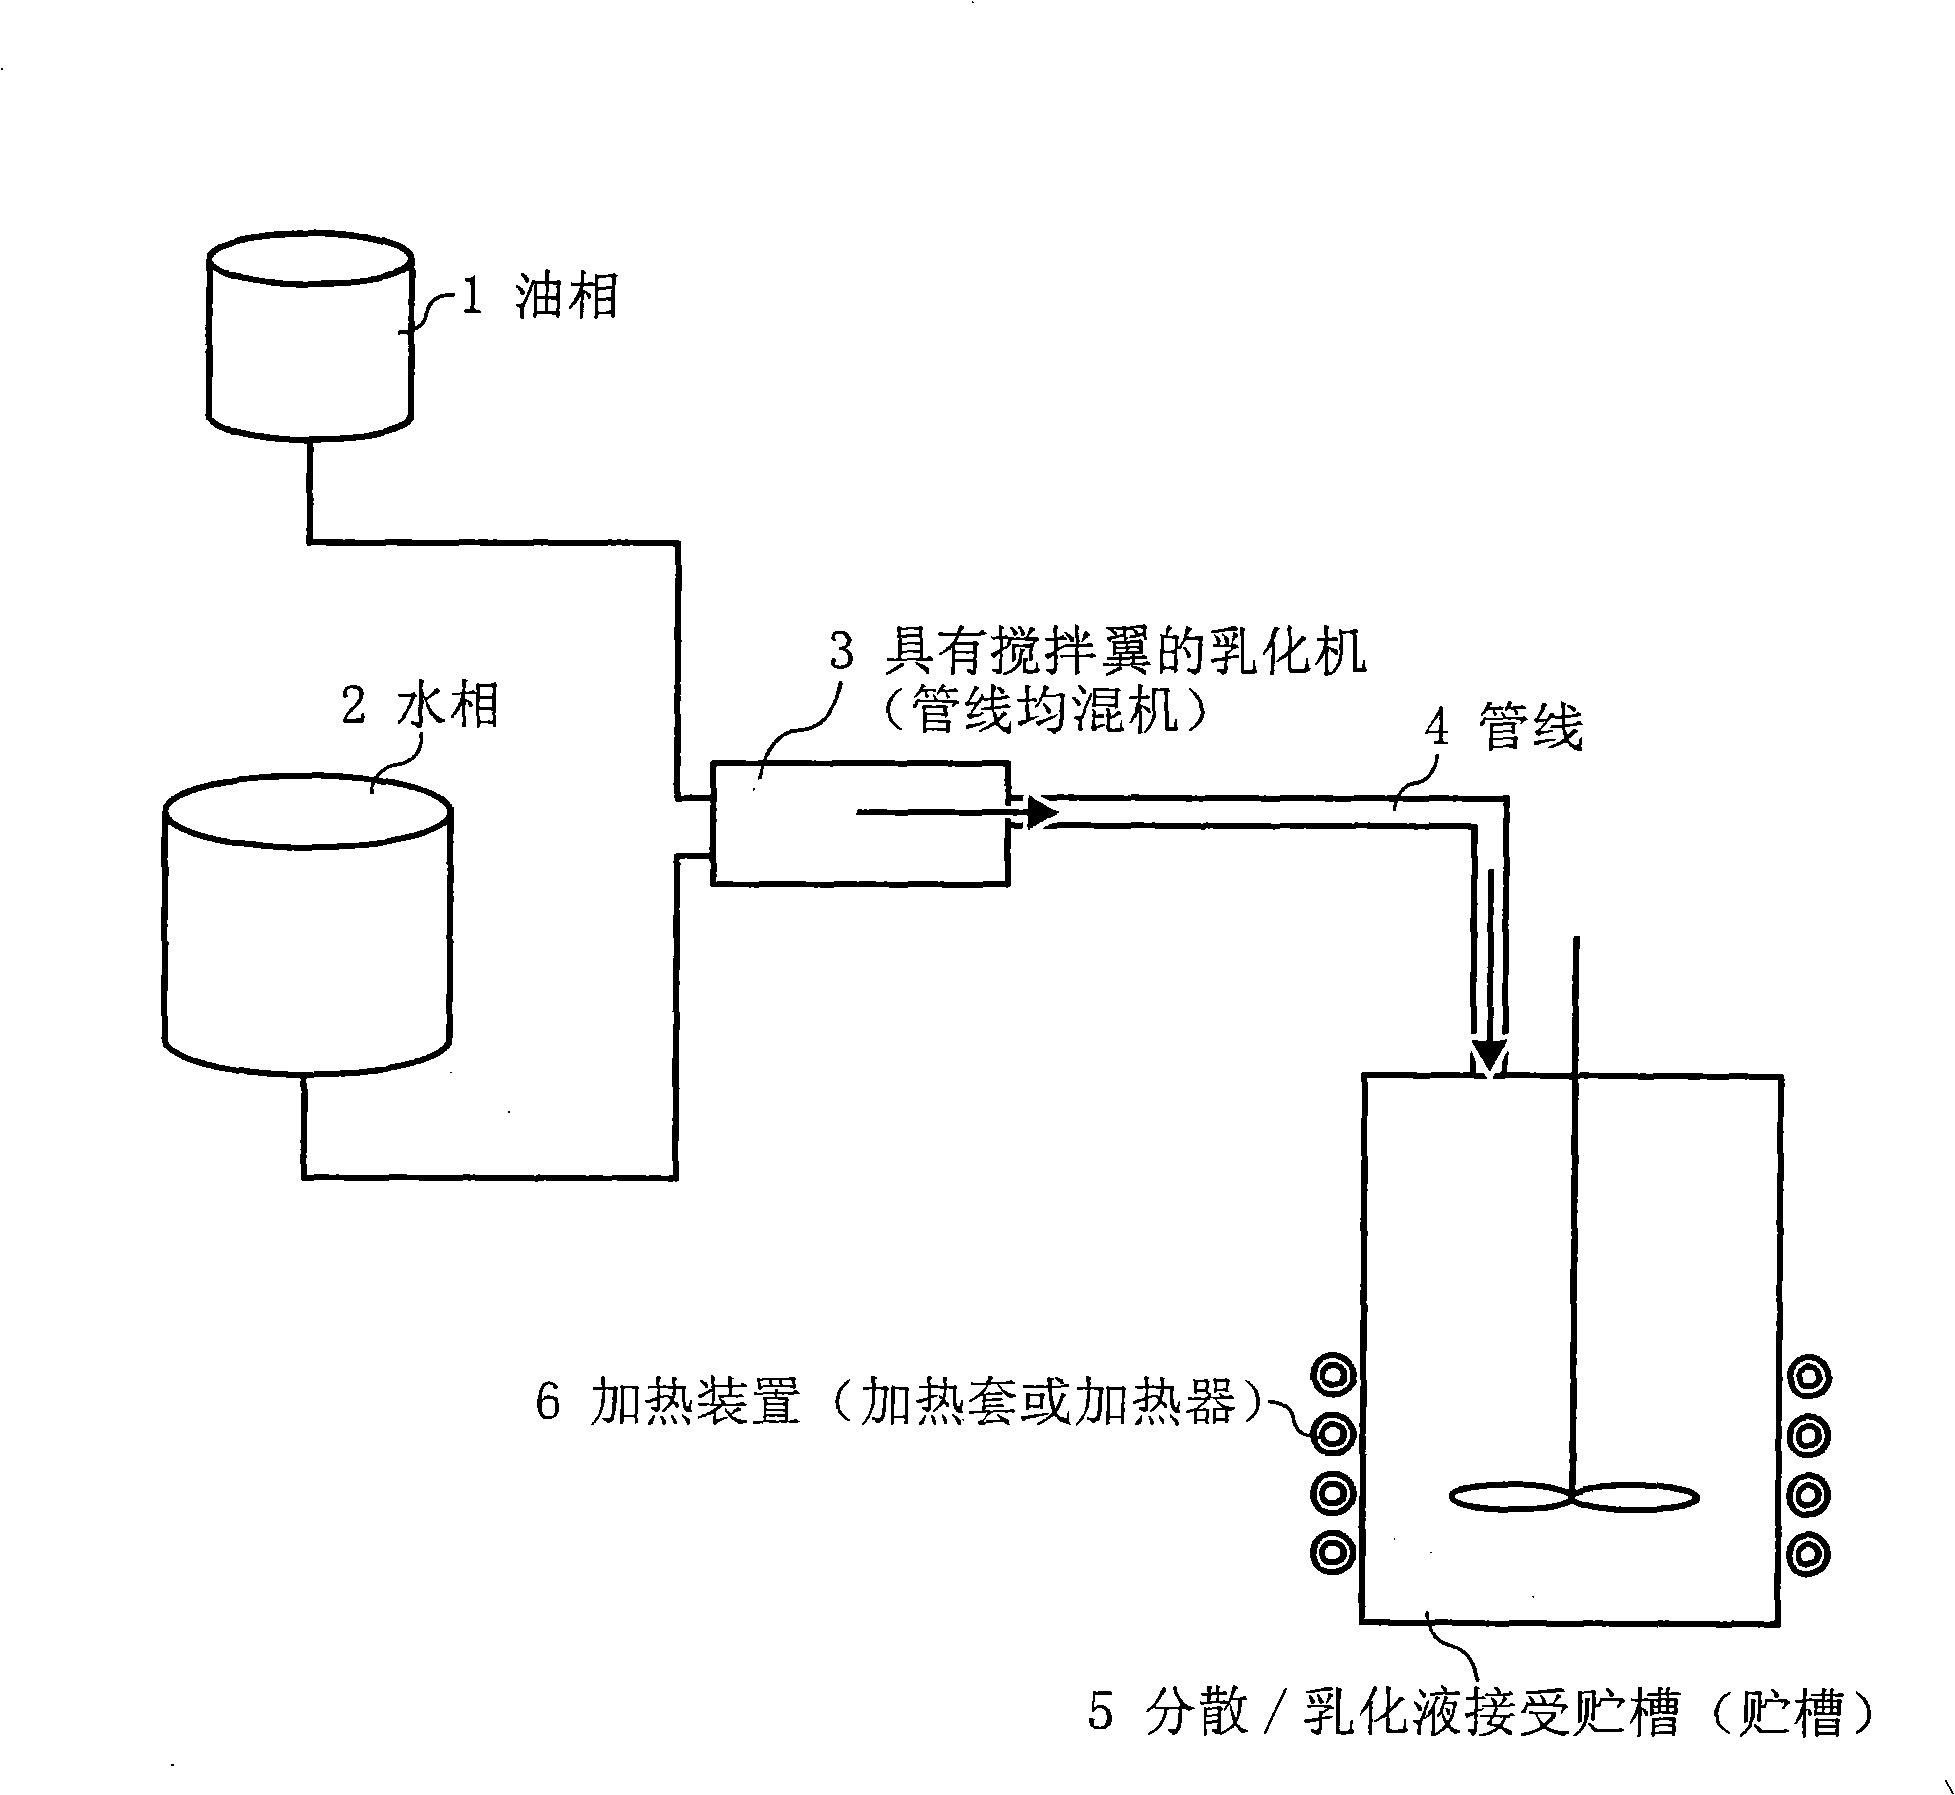 Method of manufacturing toner for static charge phase development and toner